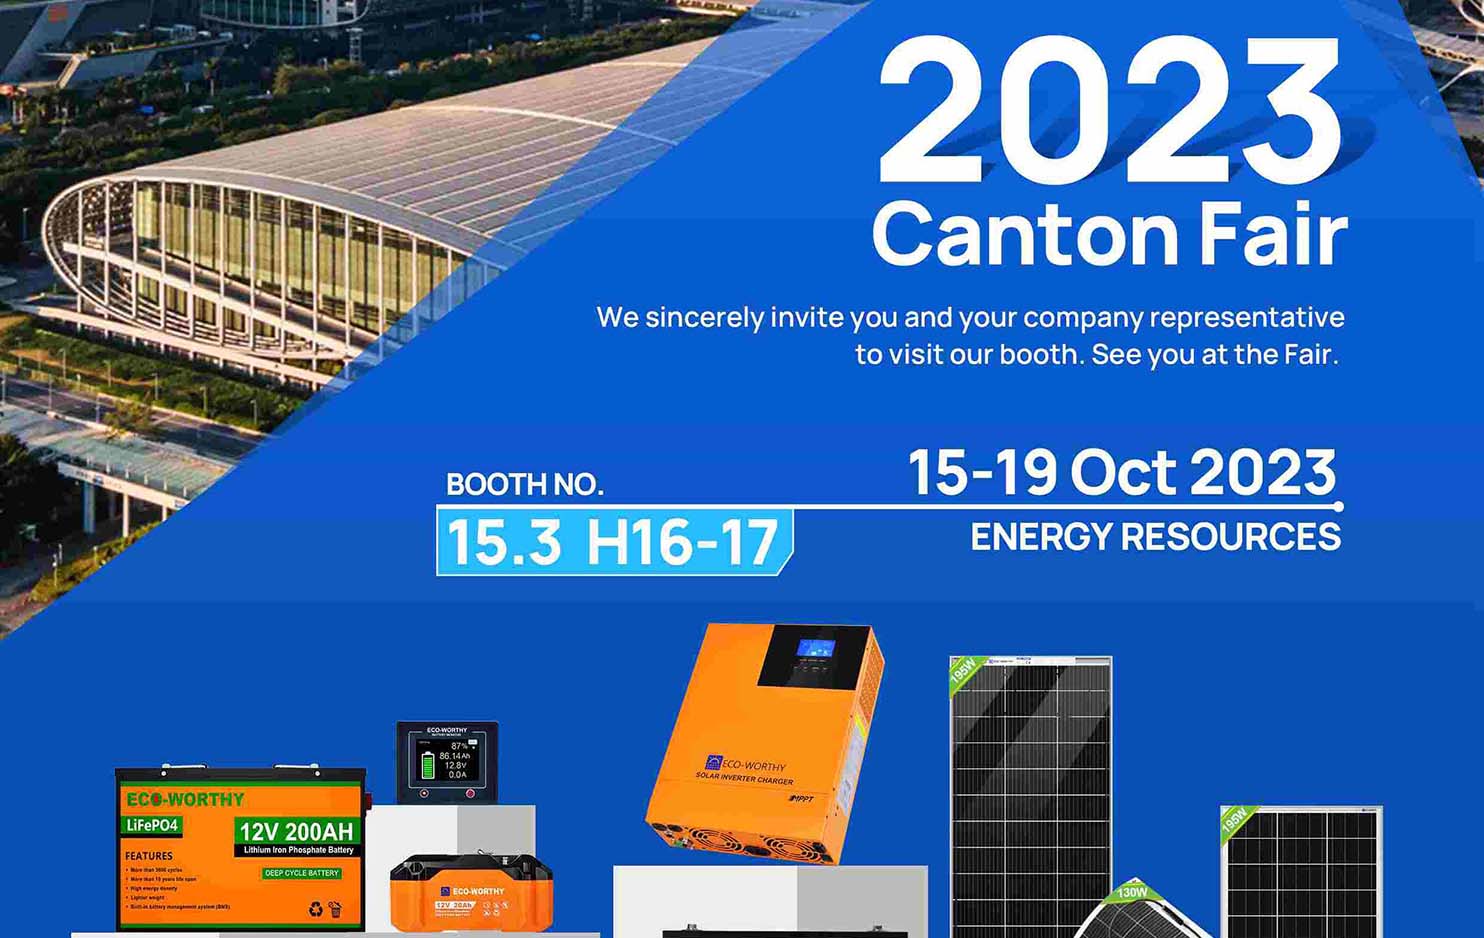 Come and Join us at the Upcoming Canton Fair to Discover Eco-Sources!